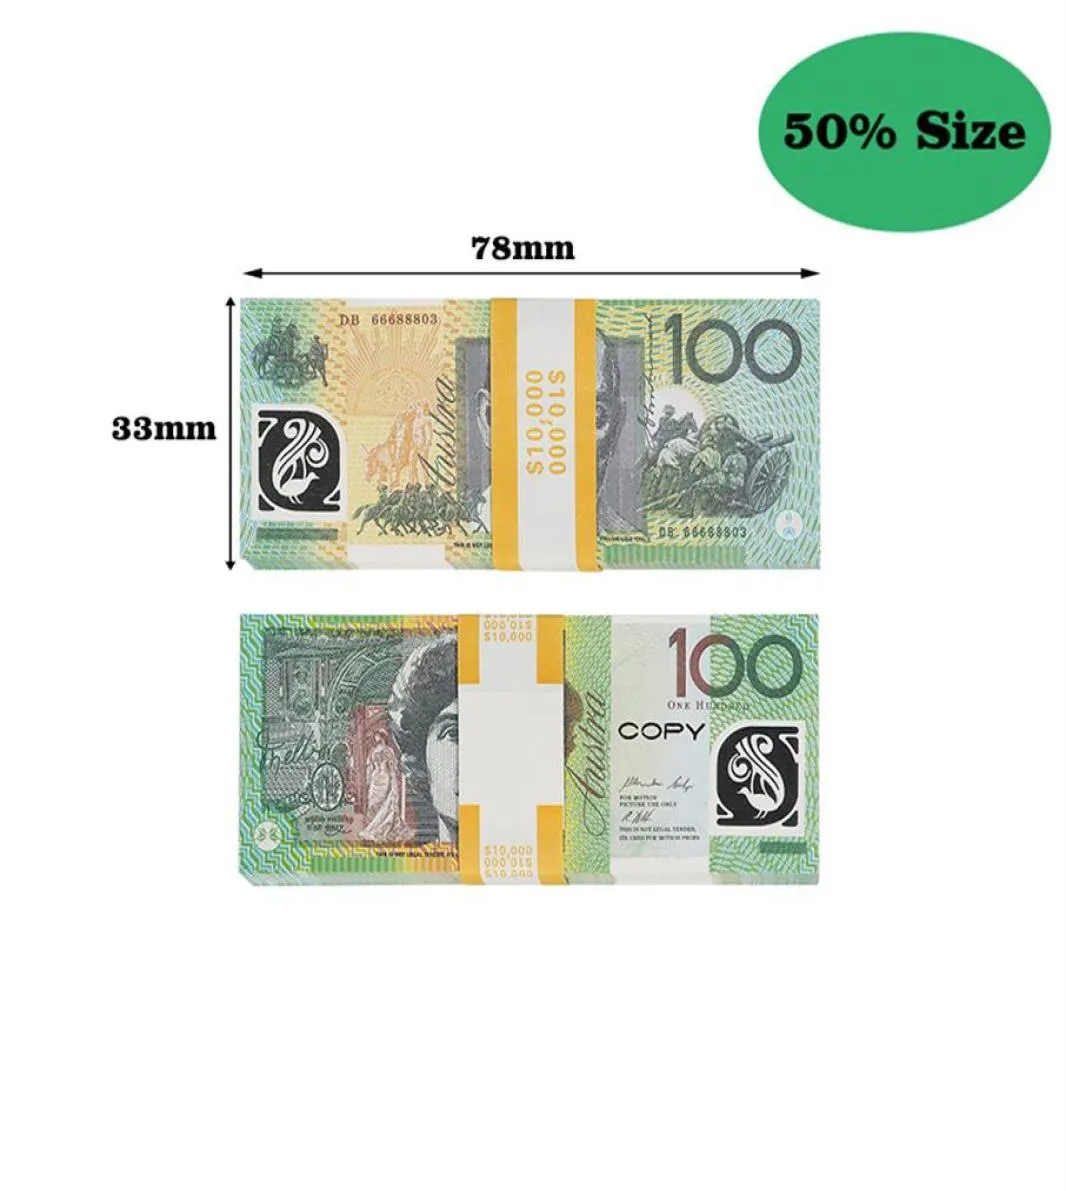 Ruvince 50 Size Prop Game Австралийский доллар 5 10 50 50 100 Aud Banknotes Paper Copite Fake Money Movie Props298e8151003